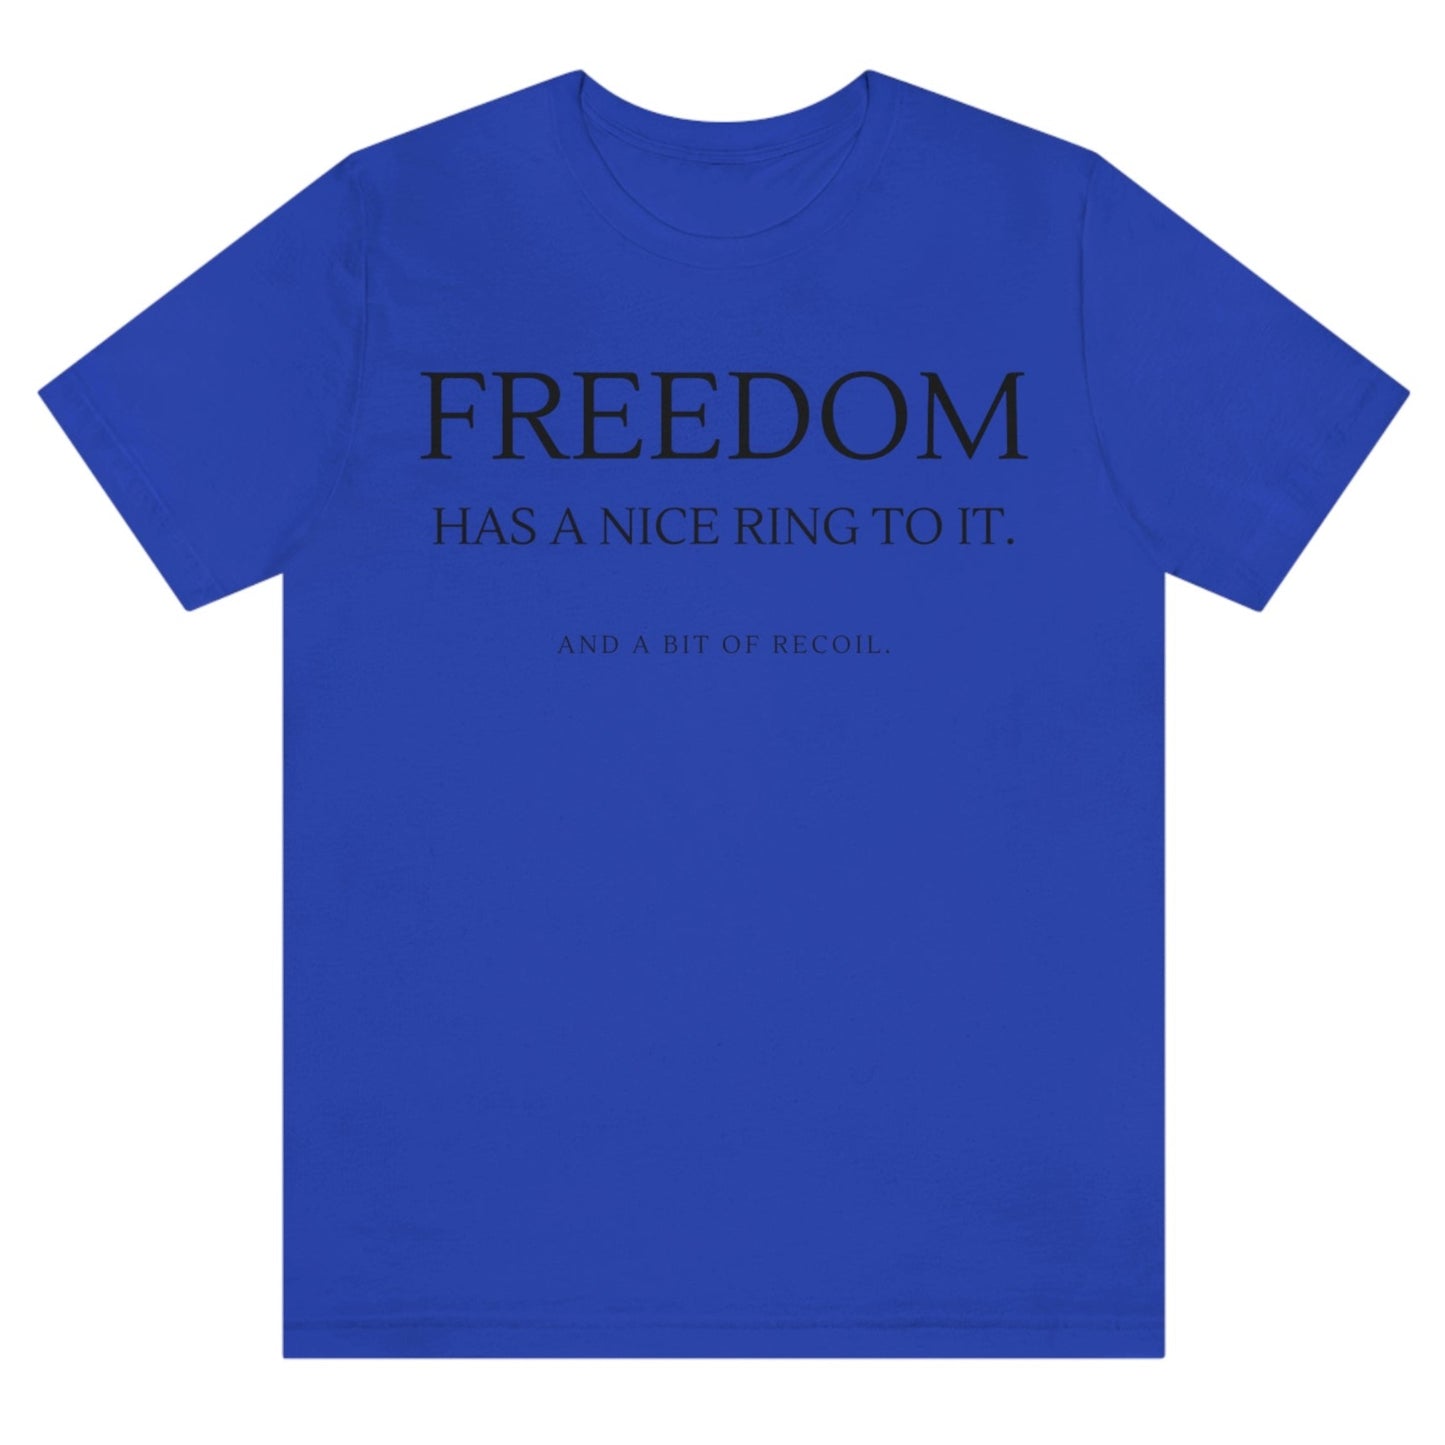 freedom-has-a-nice-ring-to-it-and-a-bit-of-recoil-true-navy-blue-t-shirt-2a